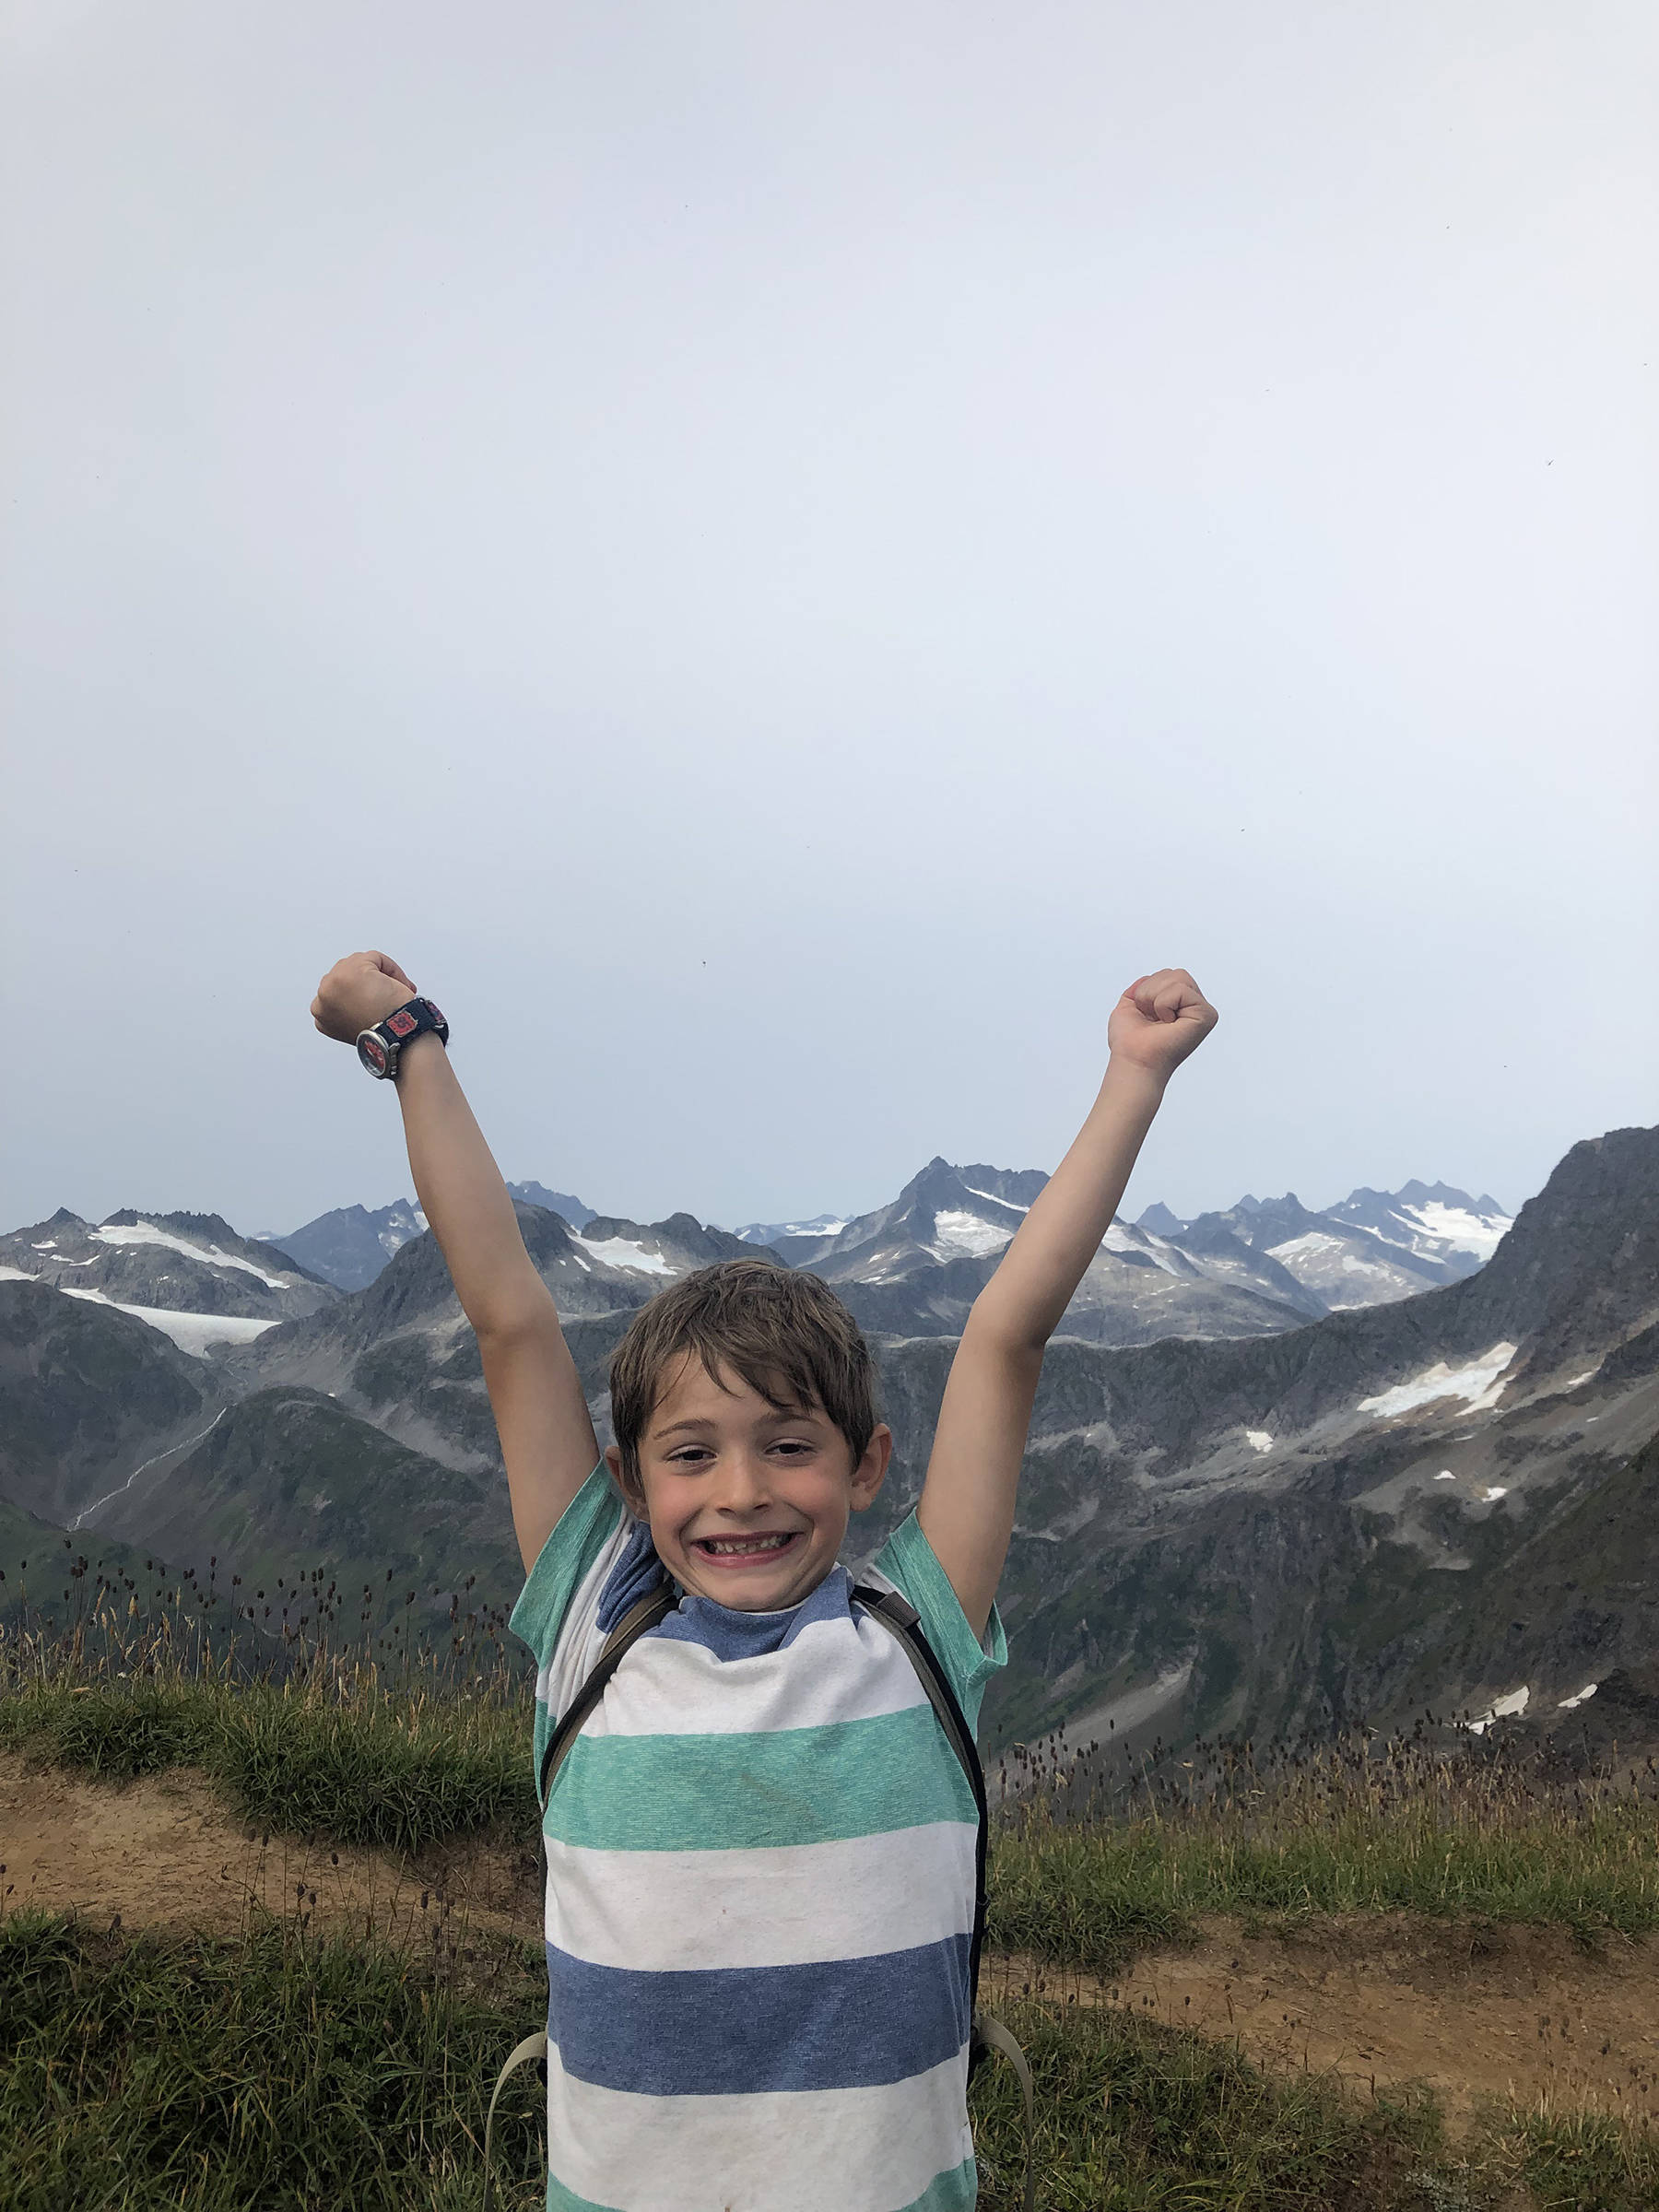 Rowan Taintor on top of Mount McGinnis on Friday, Aug. 2, 2019. (Courtesy Photo | Shireen Taintor)